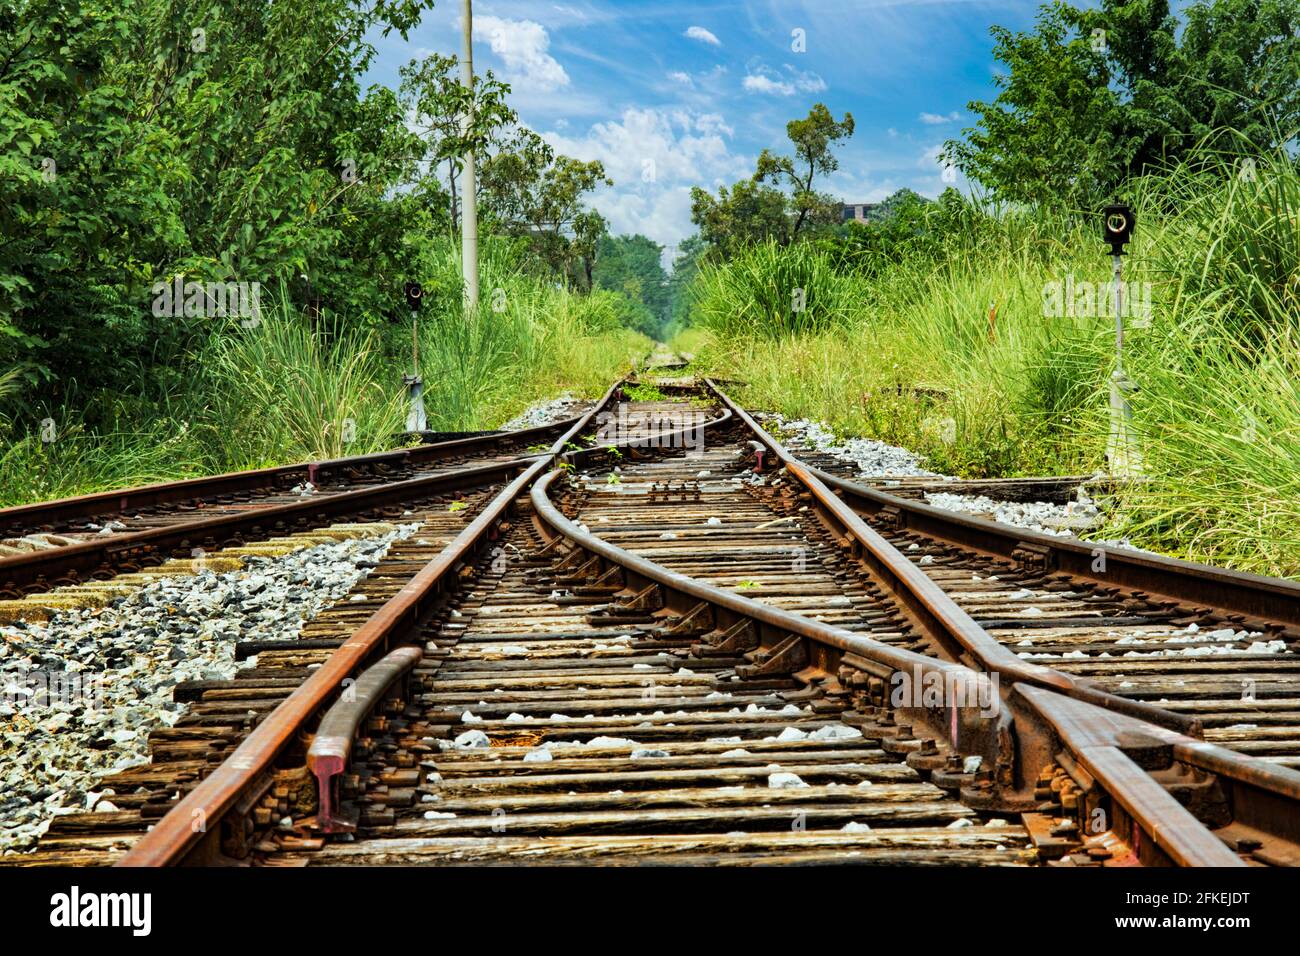 Old abandoned railway tracks out in the countryside outside dof Guilin, Guangxi Province, China Stock Photo